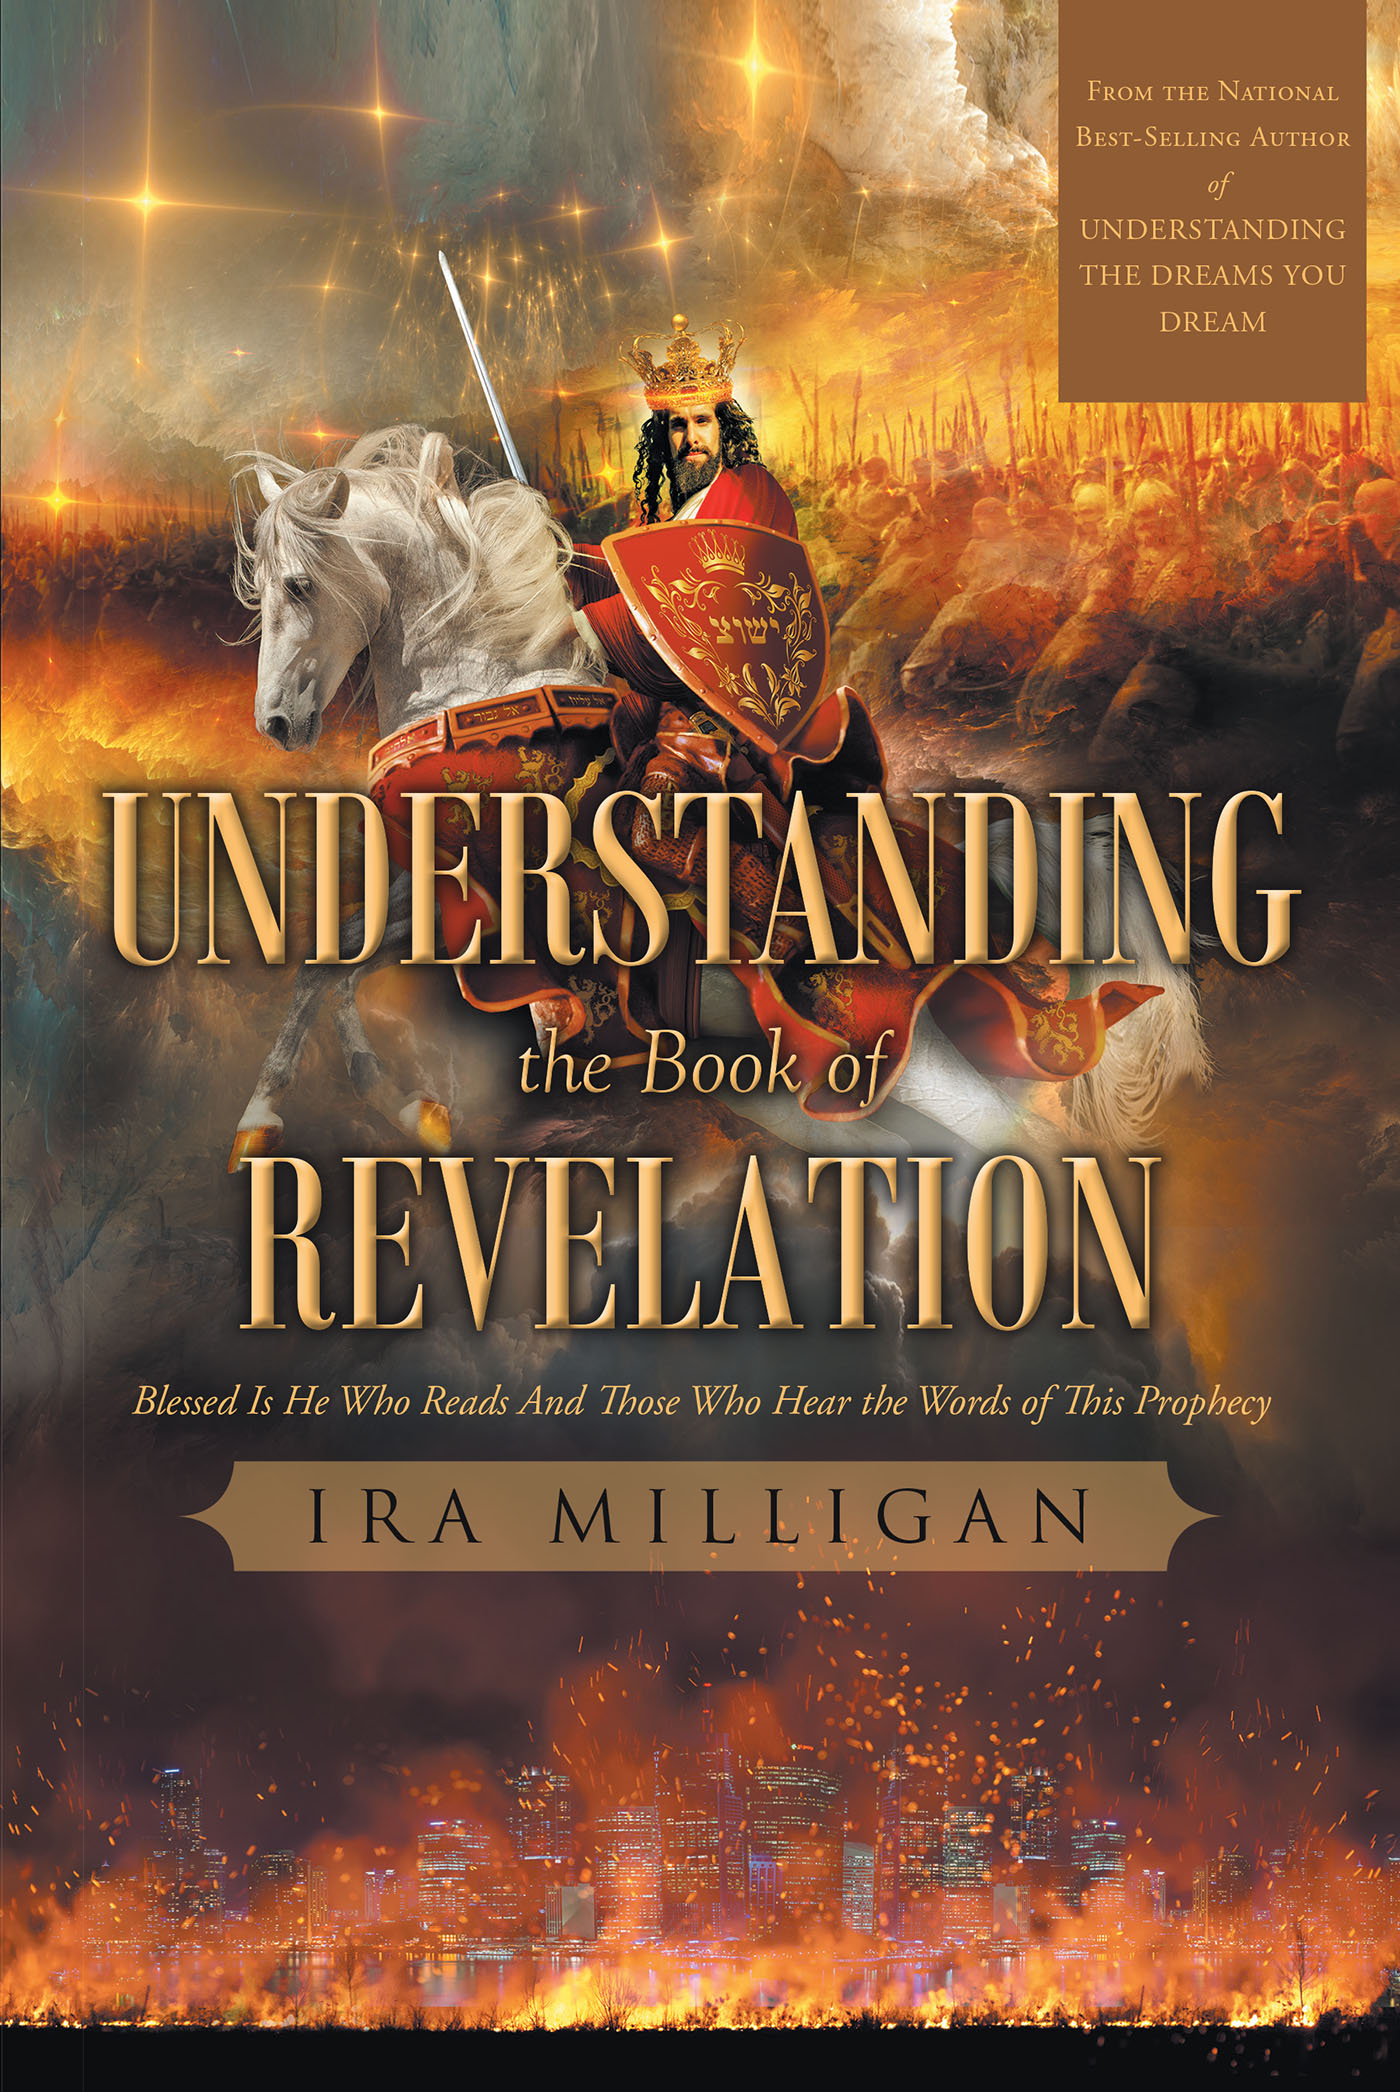 Ira Milligan’s Newly Released "Understanding the Book of Revelation" is an Informative Study of the Prophetic Writings of John Within Revelation